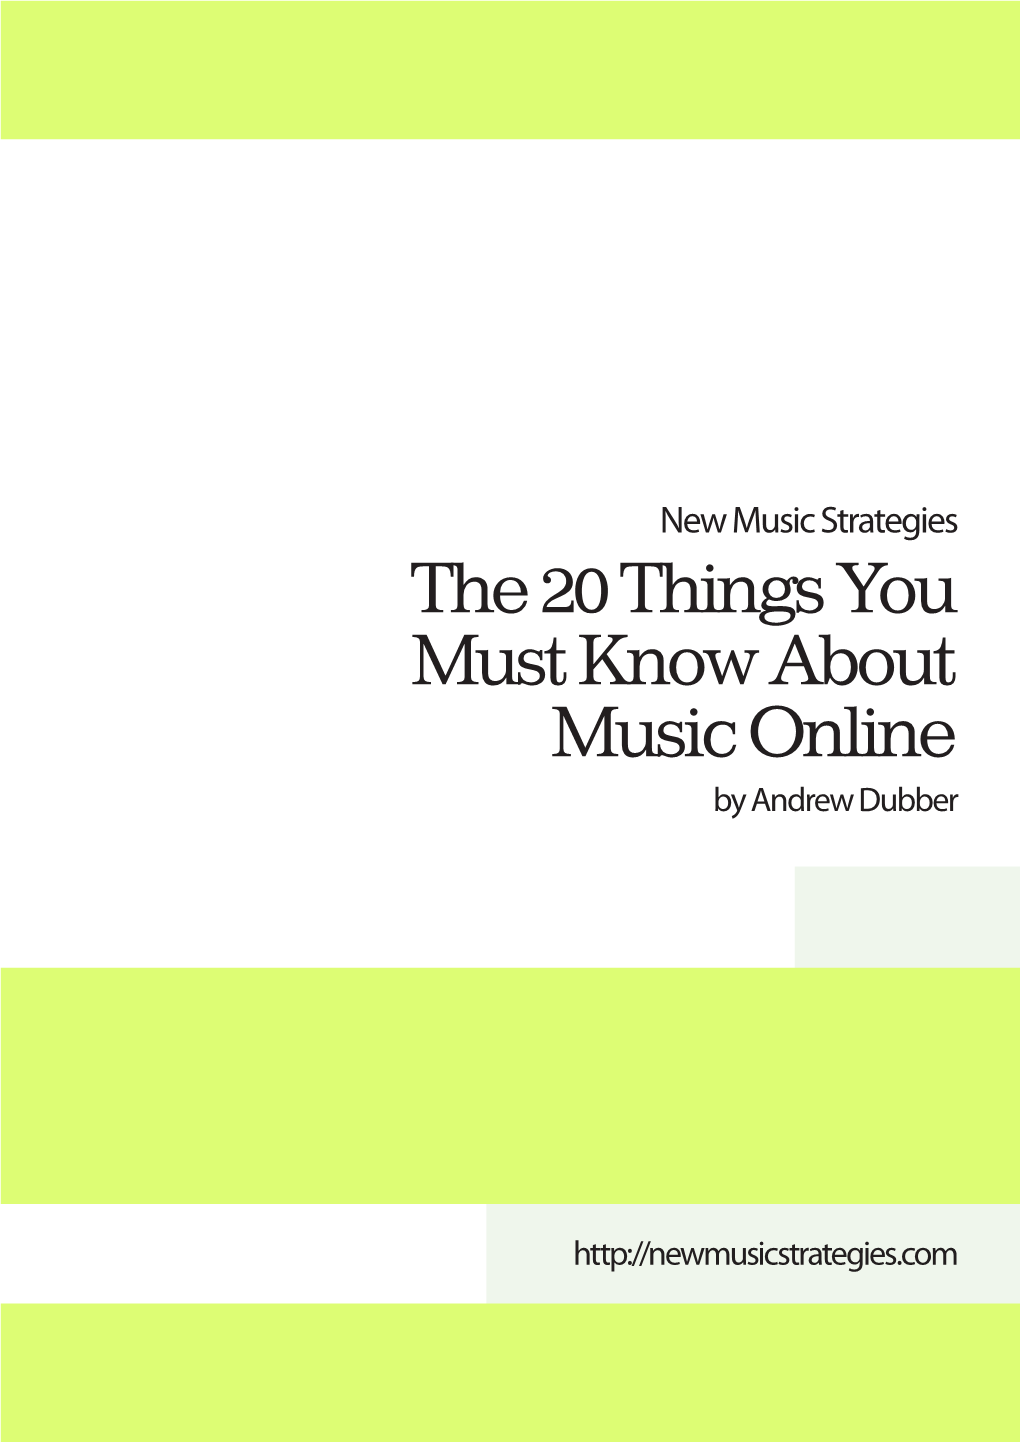 The 20 Things You Must Know About Music Online by Andrew Dubber